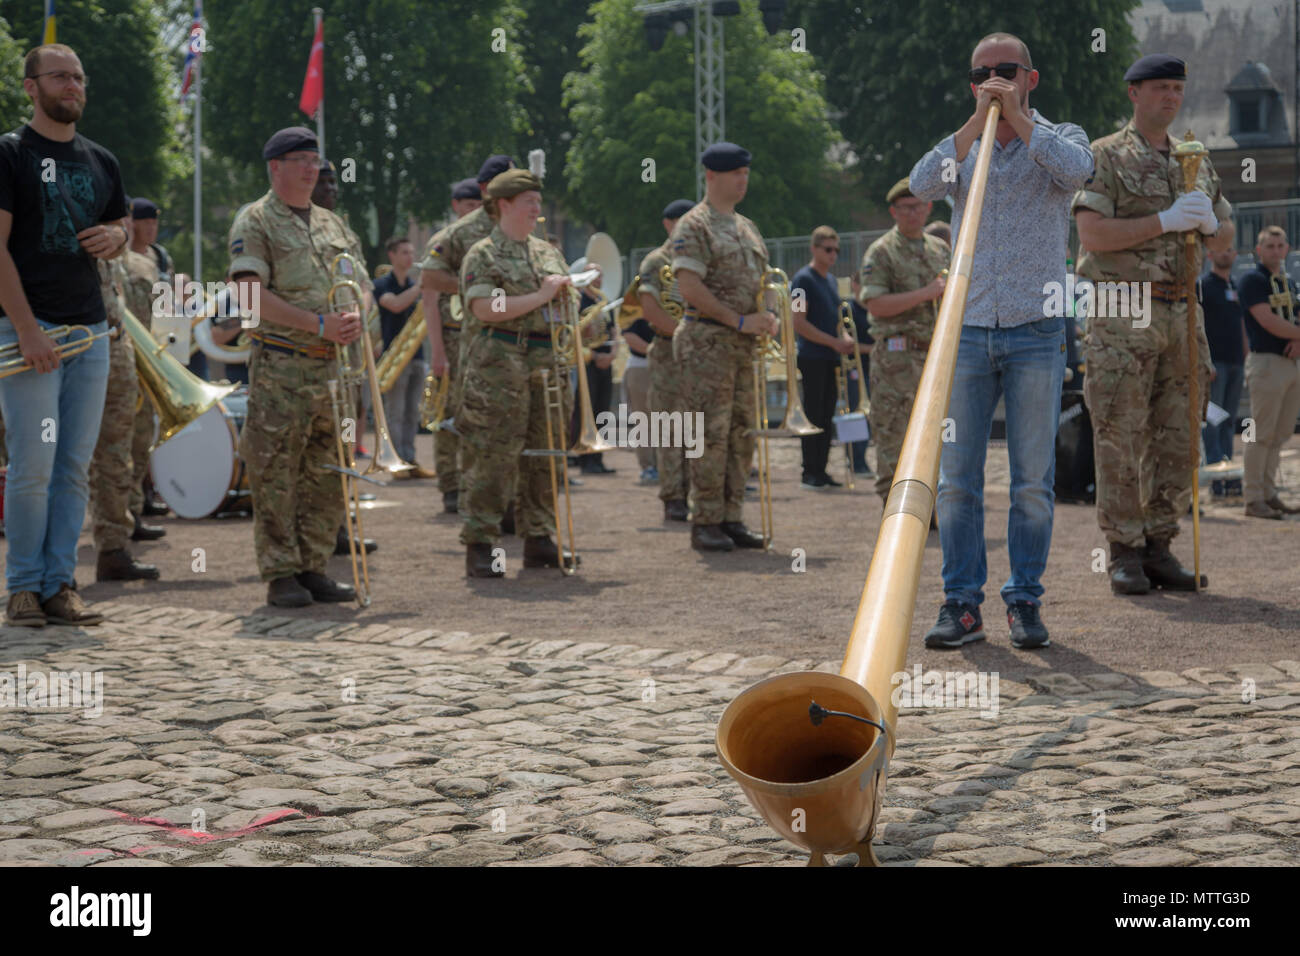 The alpine horn is performed during dress rehearsal for the Citadelle 350 anniversary military show.  US Army photo by Sgt Joseph Agacinski/released. Stock Photo